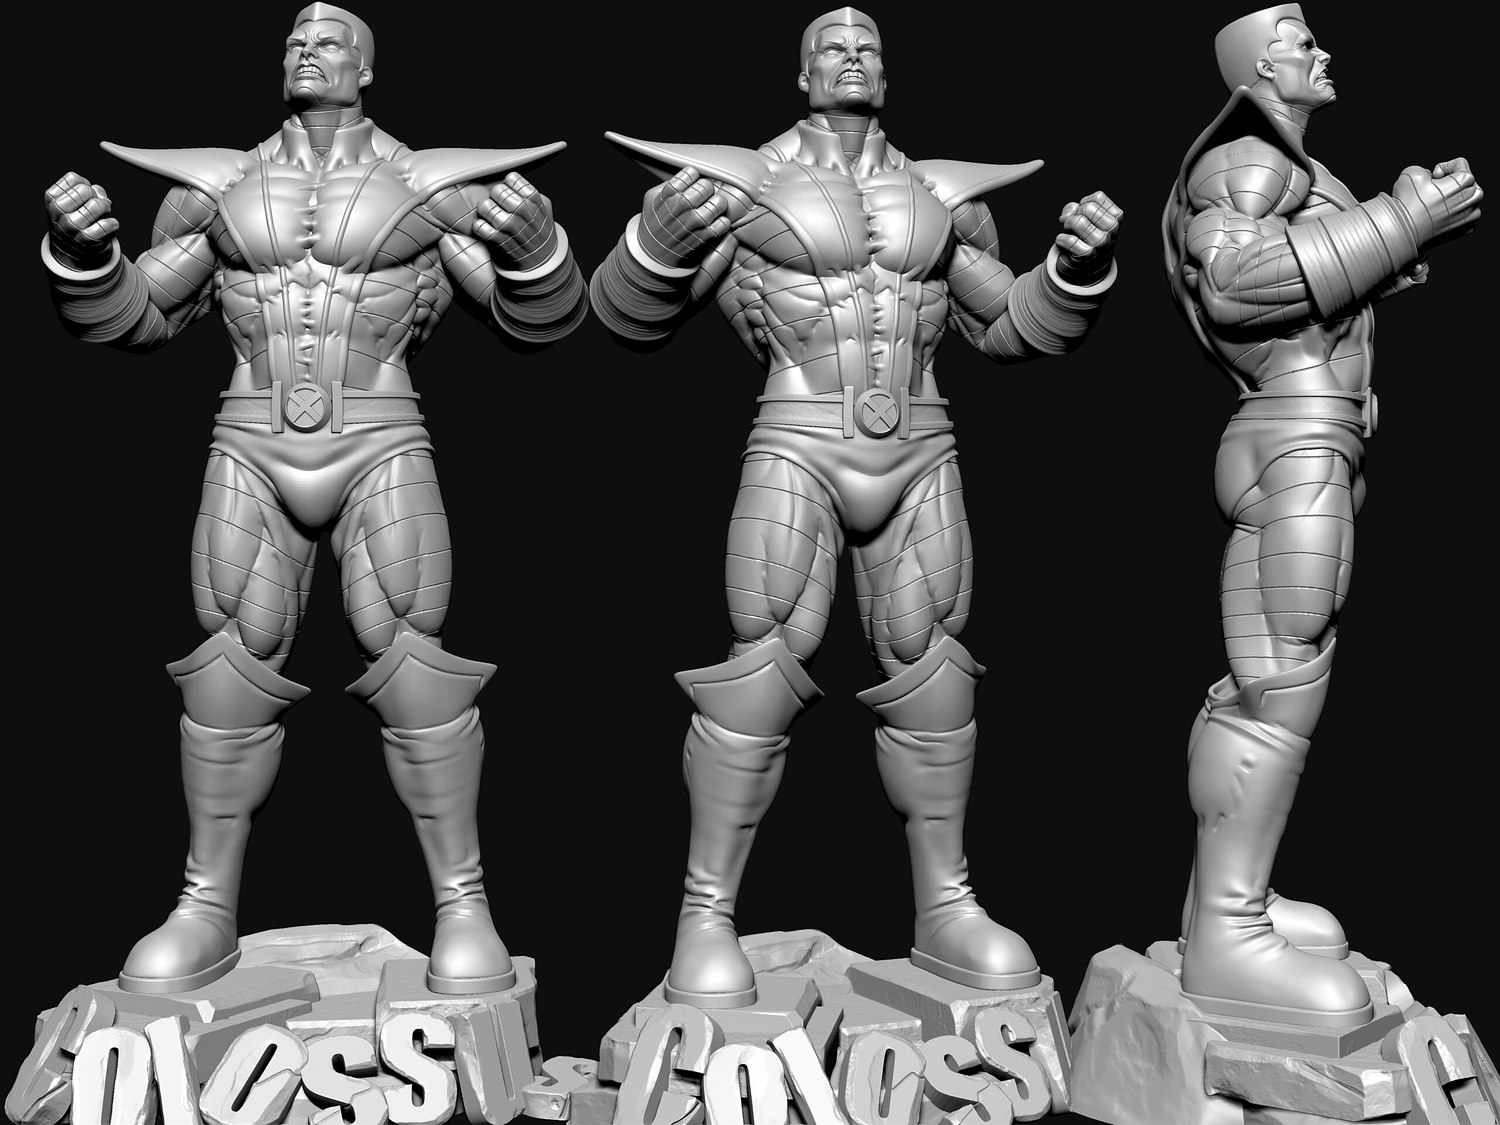 Colossus Power from X-Men